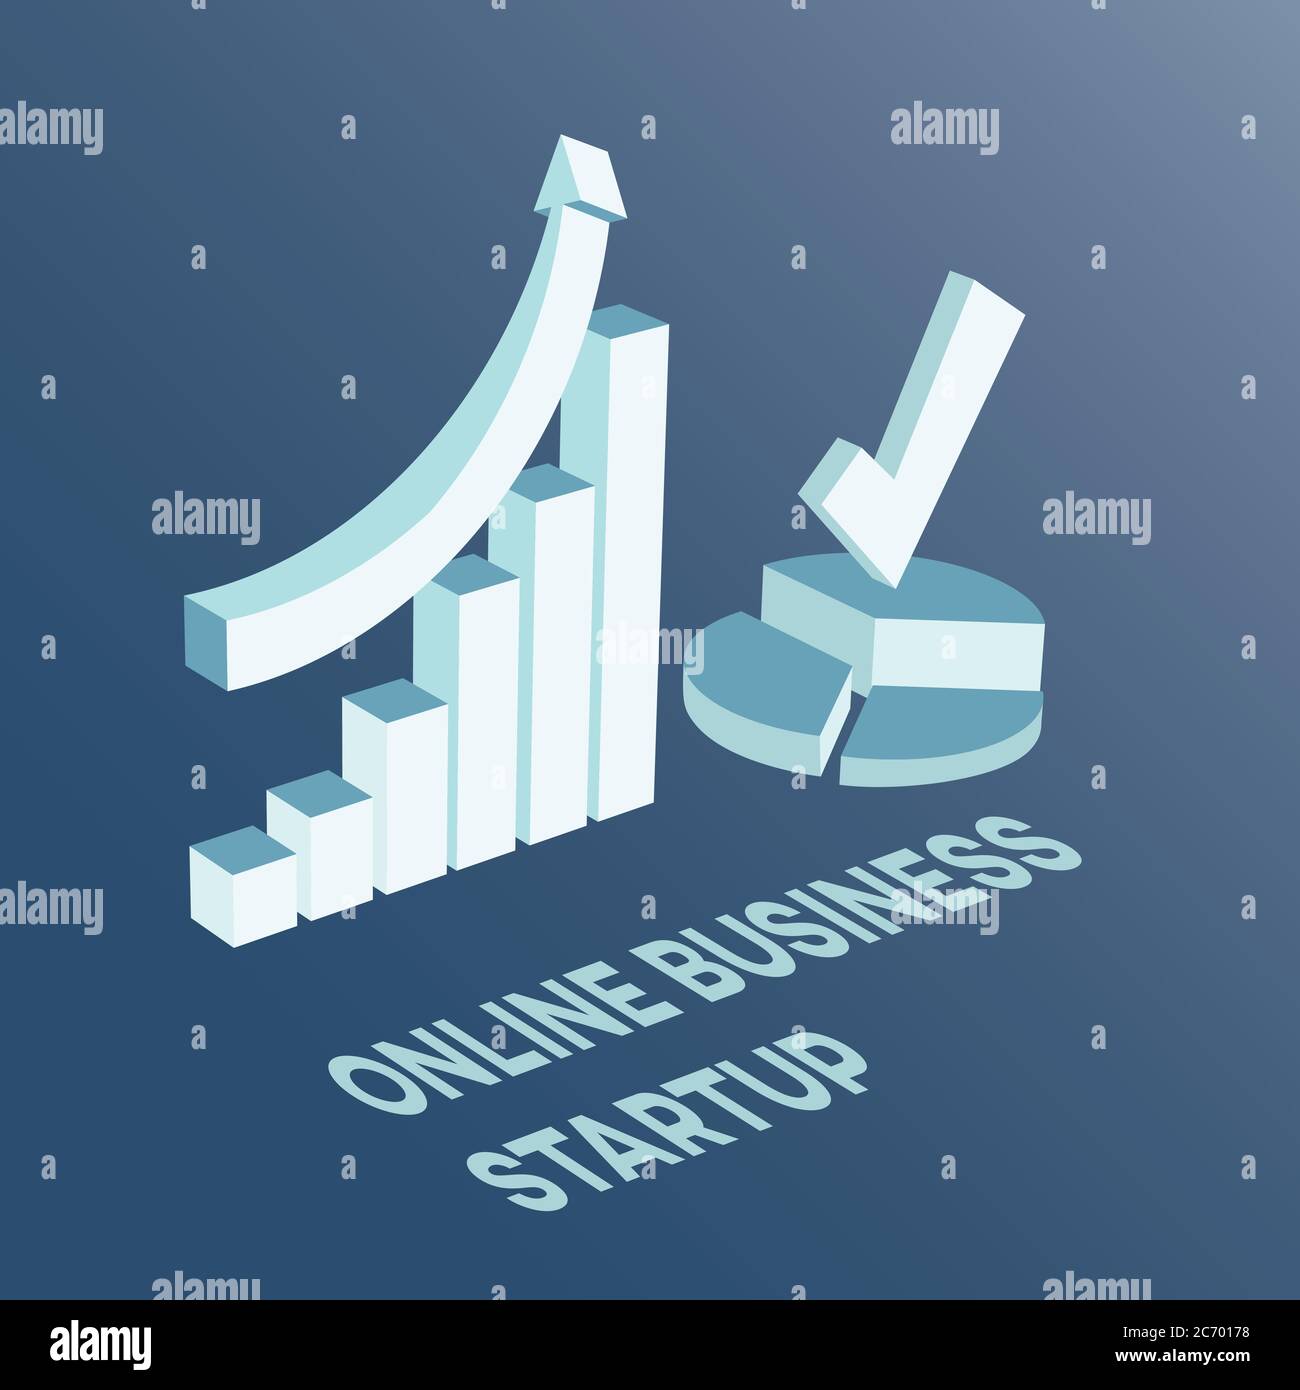 Online business startup growing income illustration. E-commerce success company progress. Modern professional company innovations development. Stock Vector